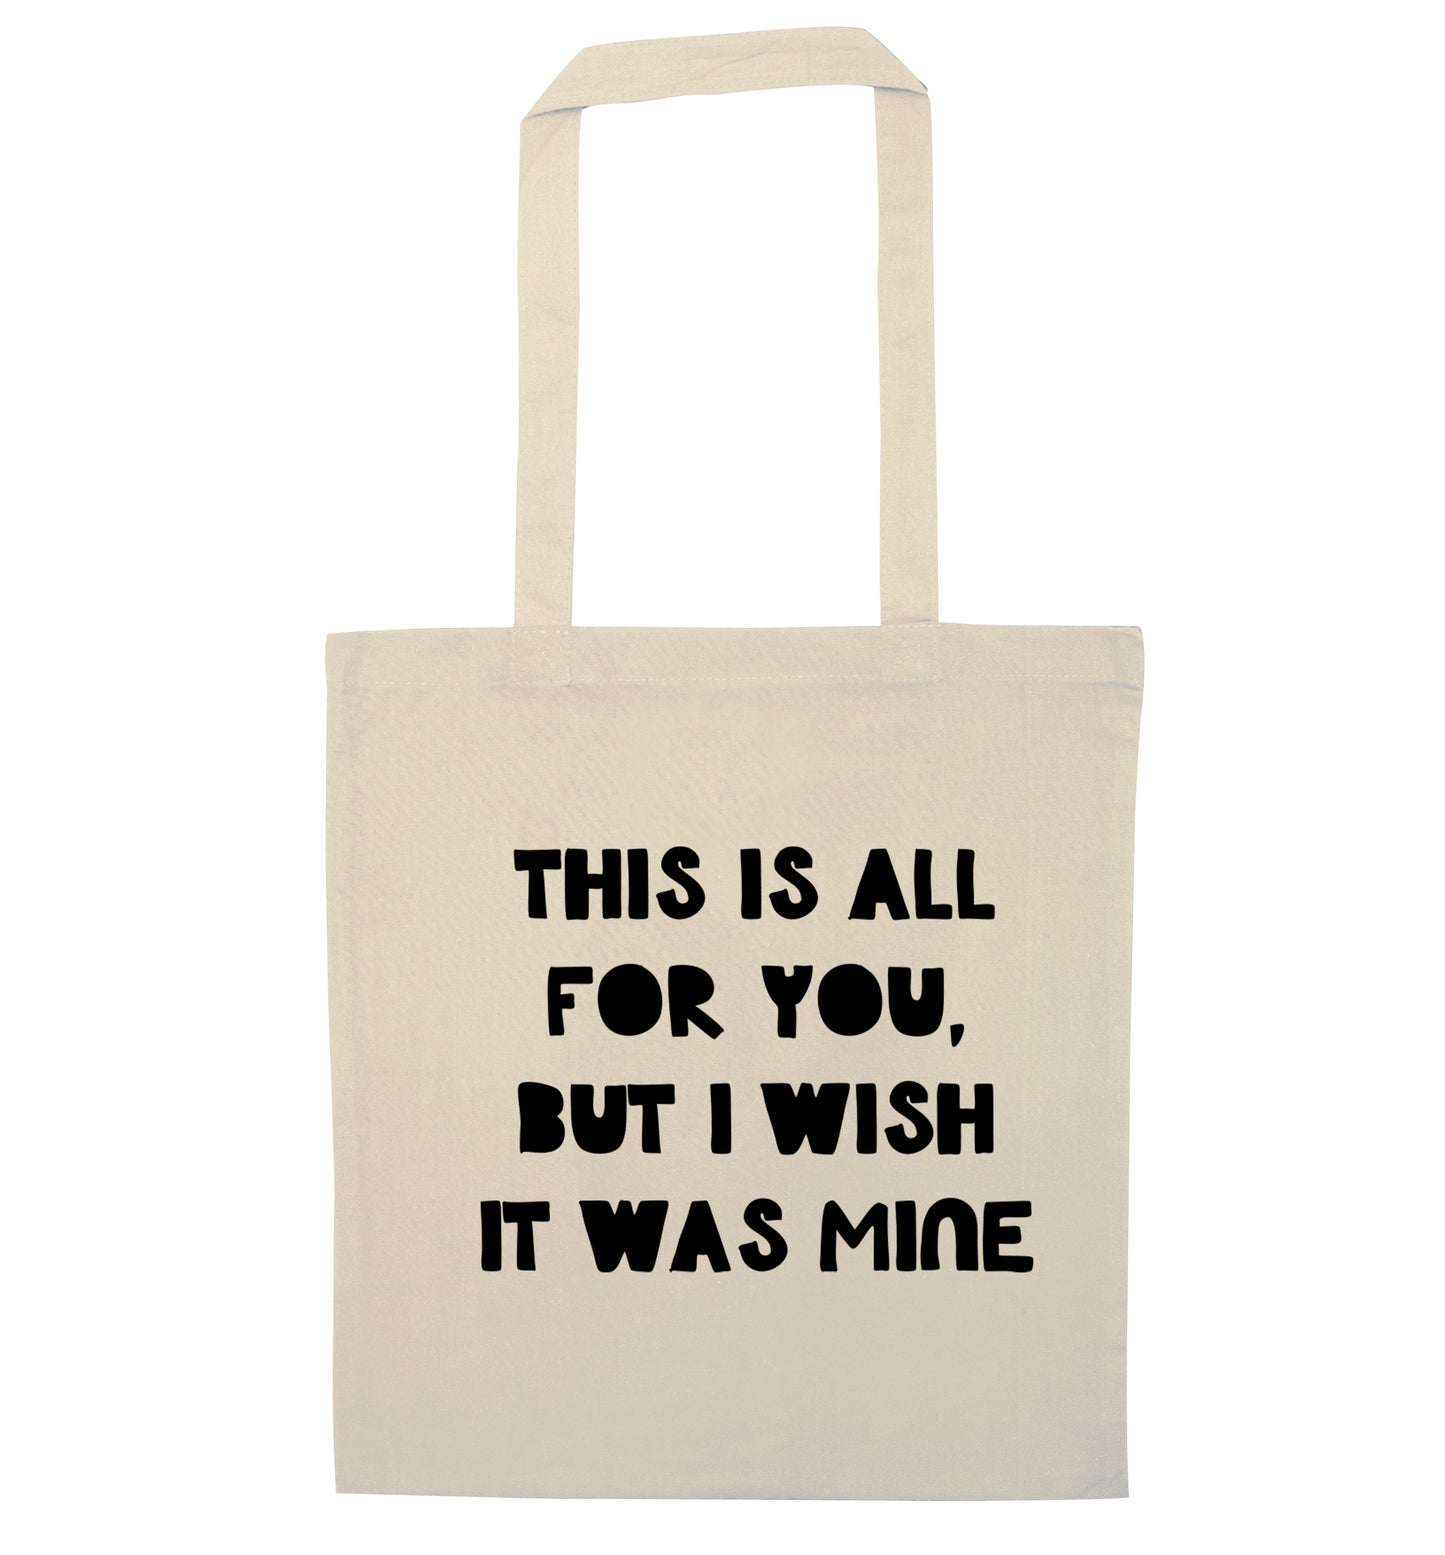 This is all for you but I wish it was mine natural tote bag